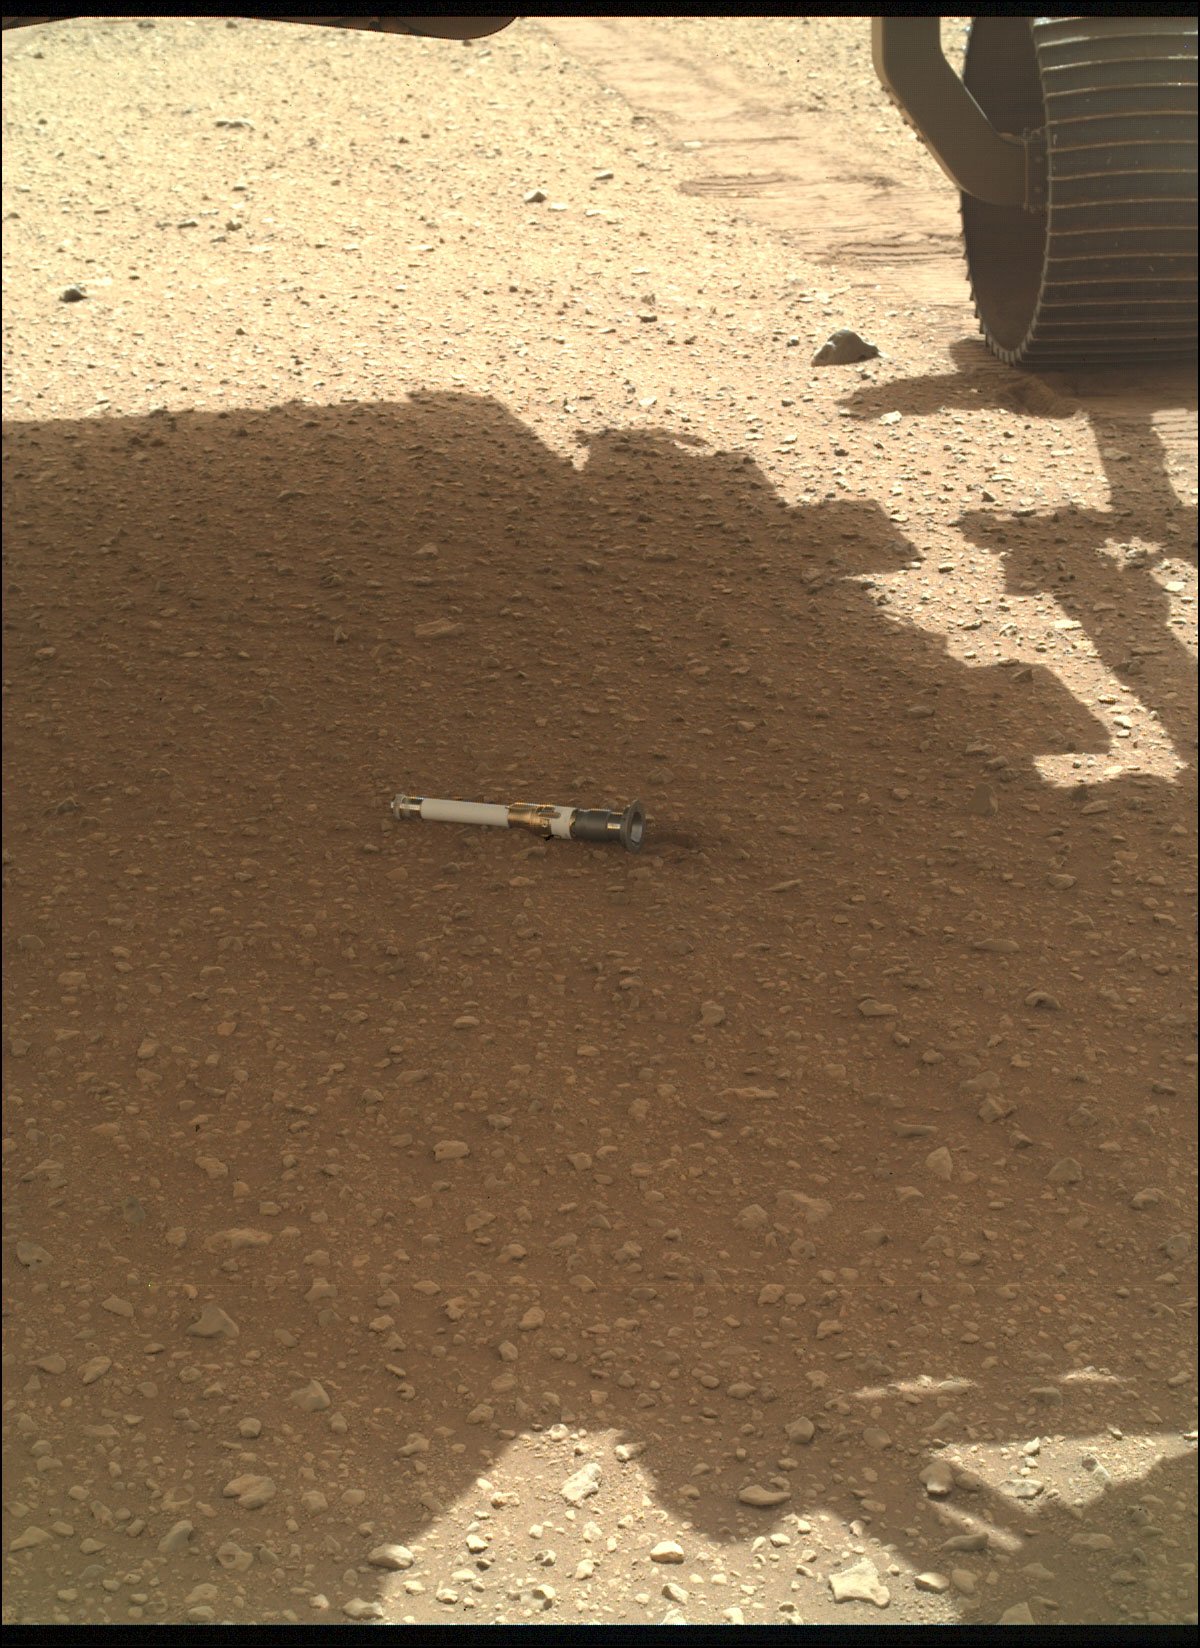 Perseverance Rover Deposits First Sample on Mars Surface